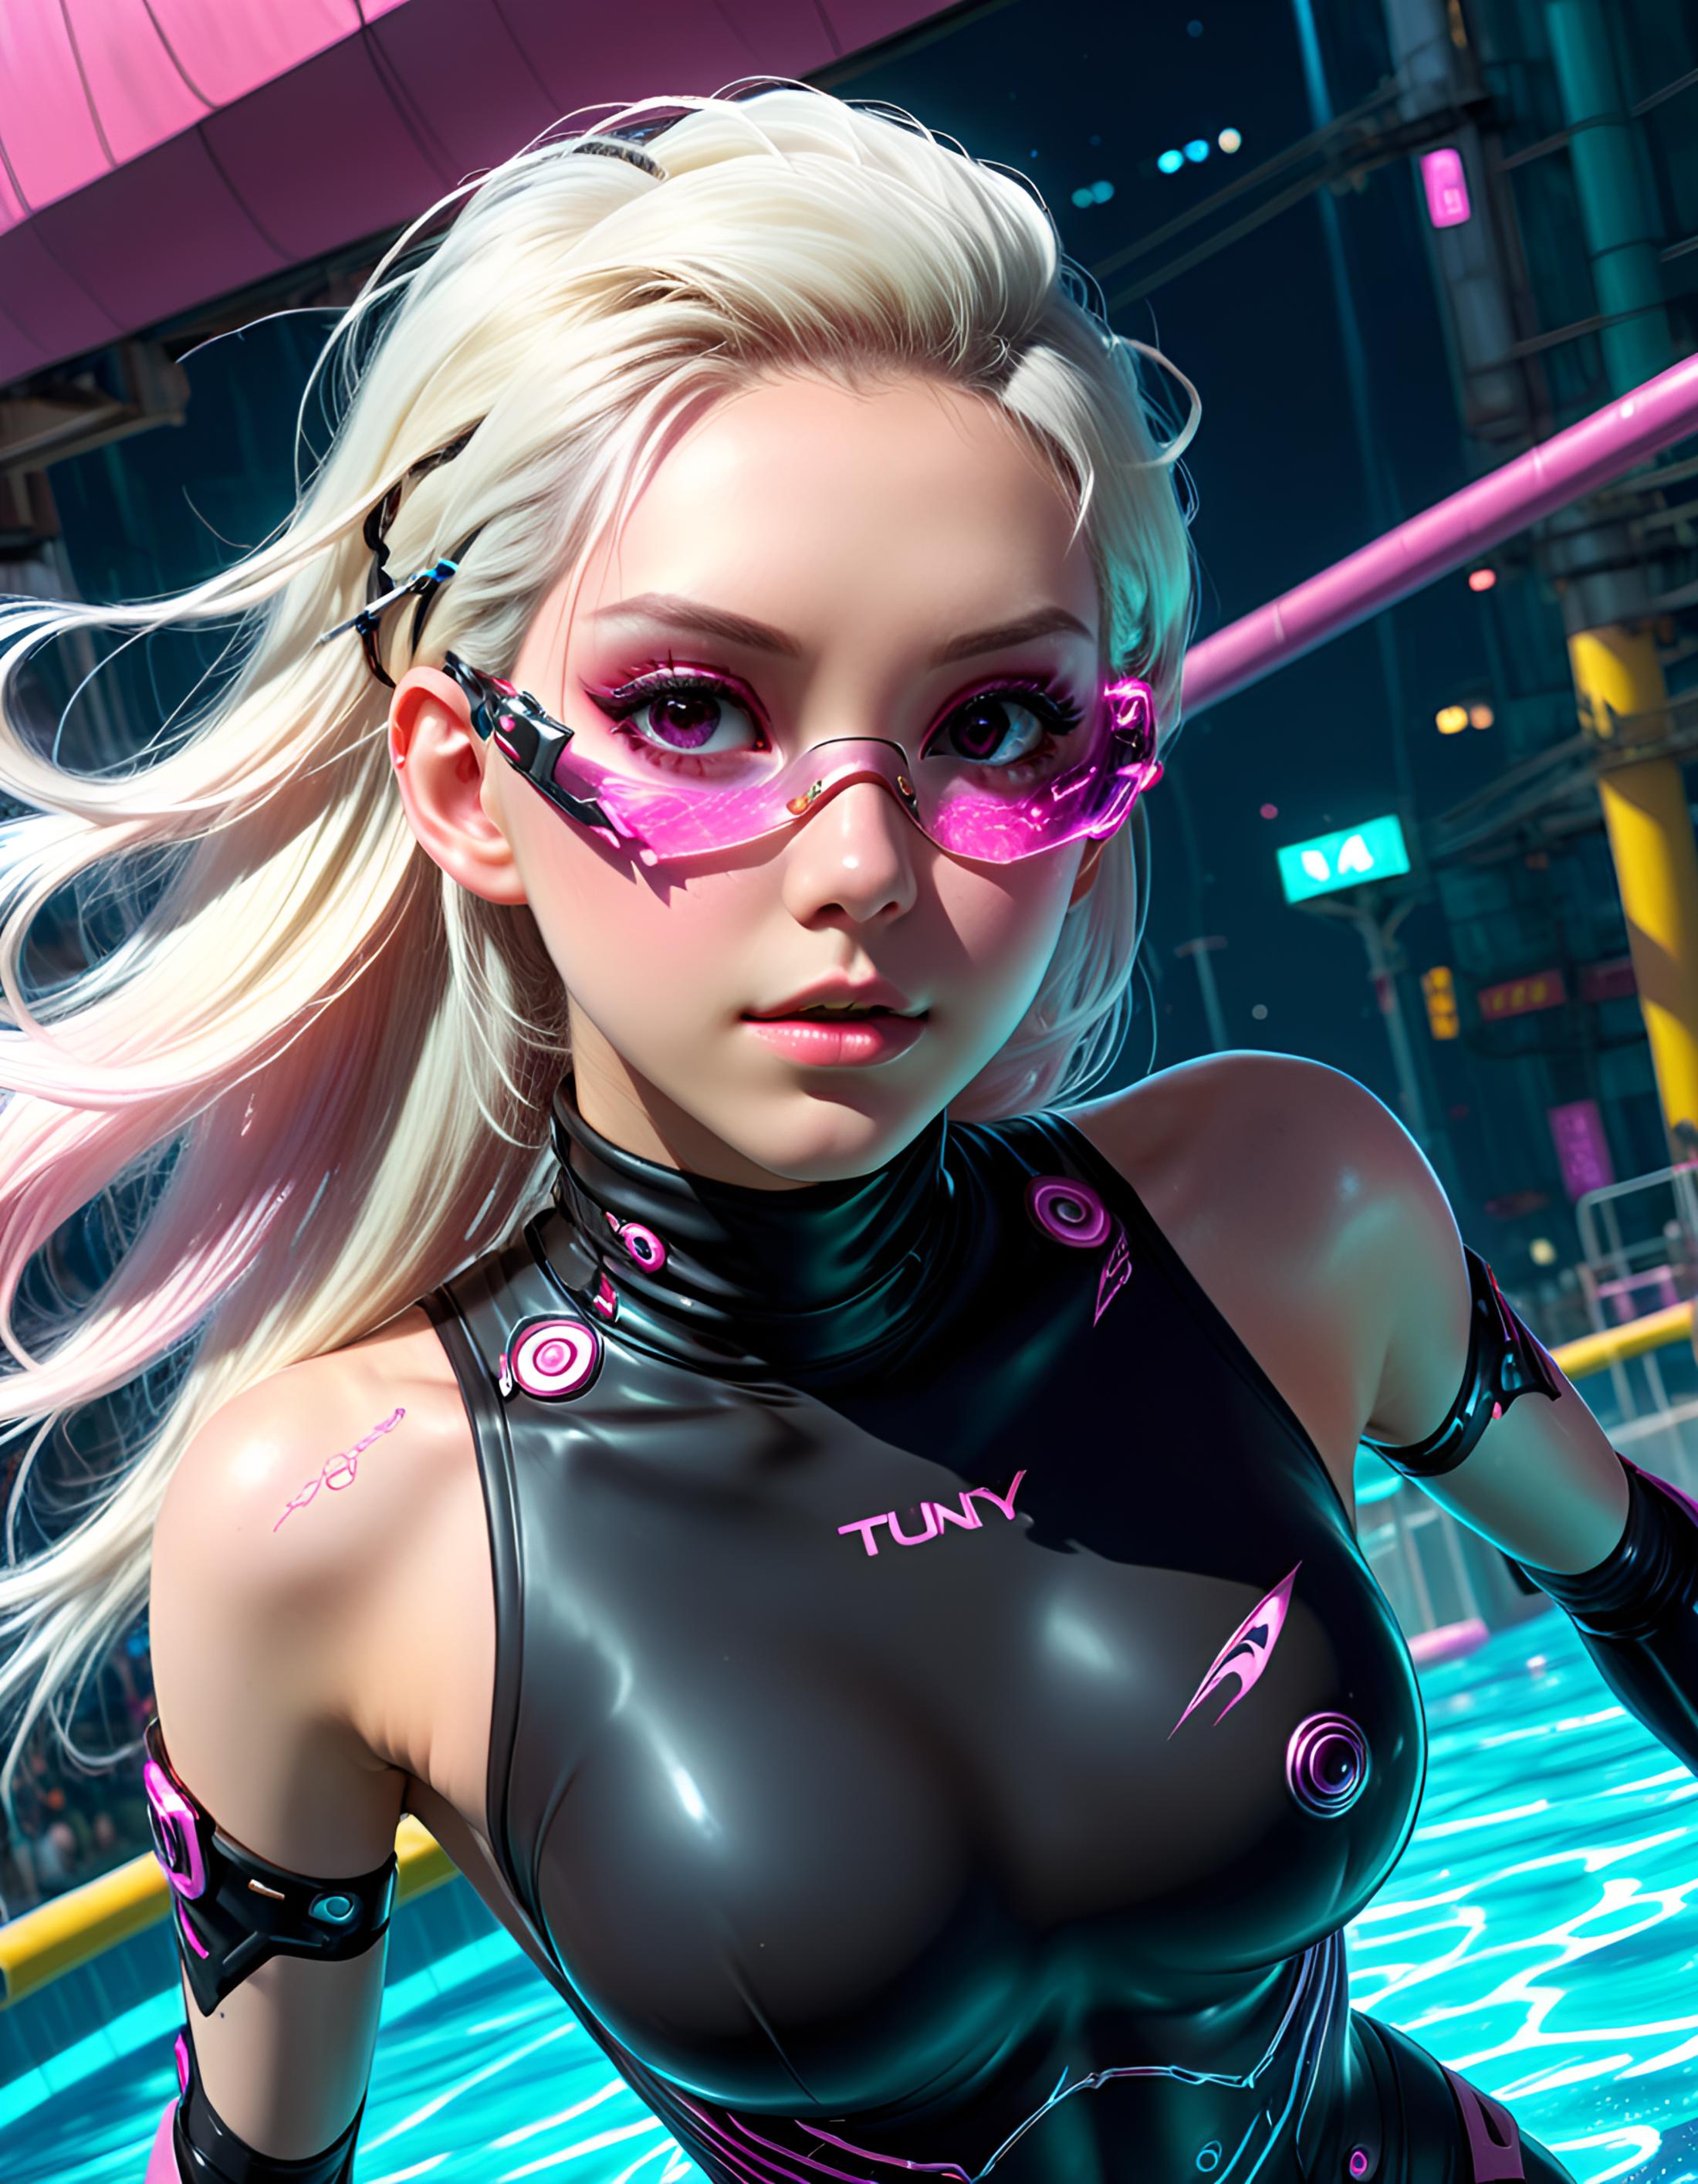 A digital art image of a blonde woman in a black and pink bodysuit with pink goggles.